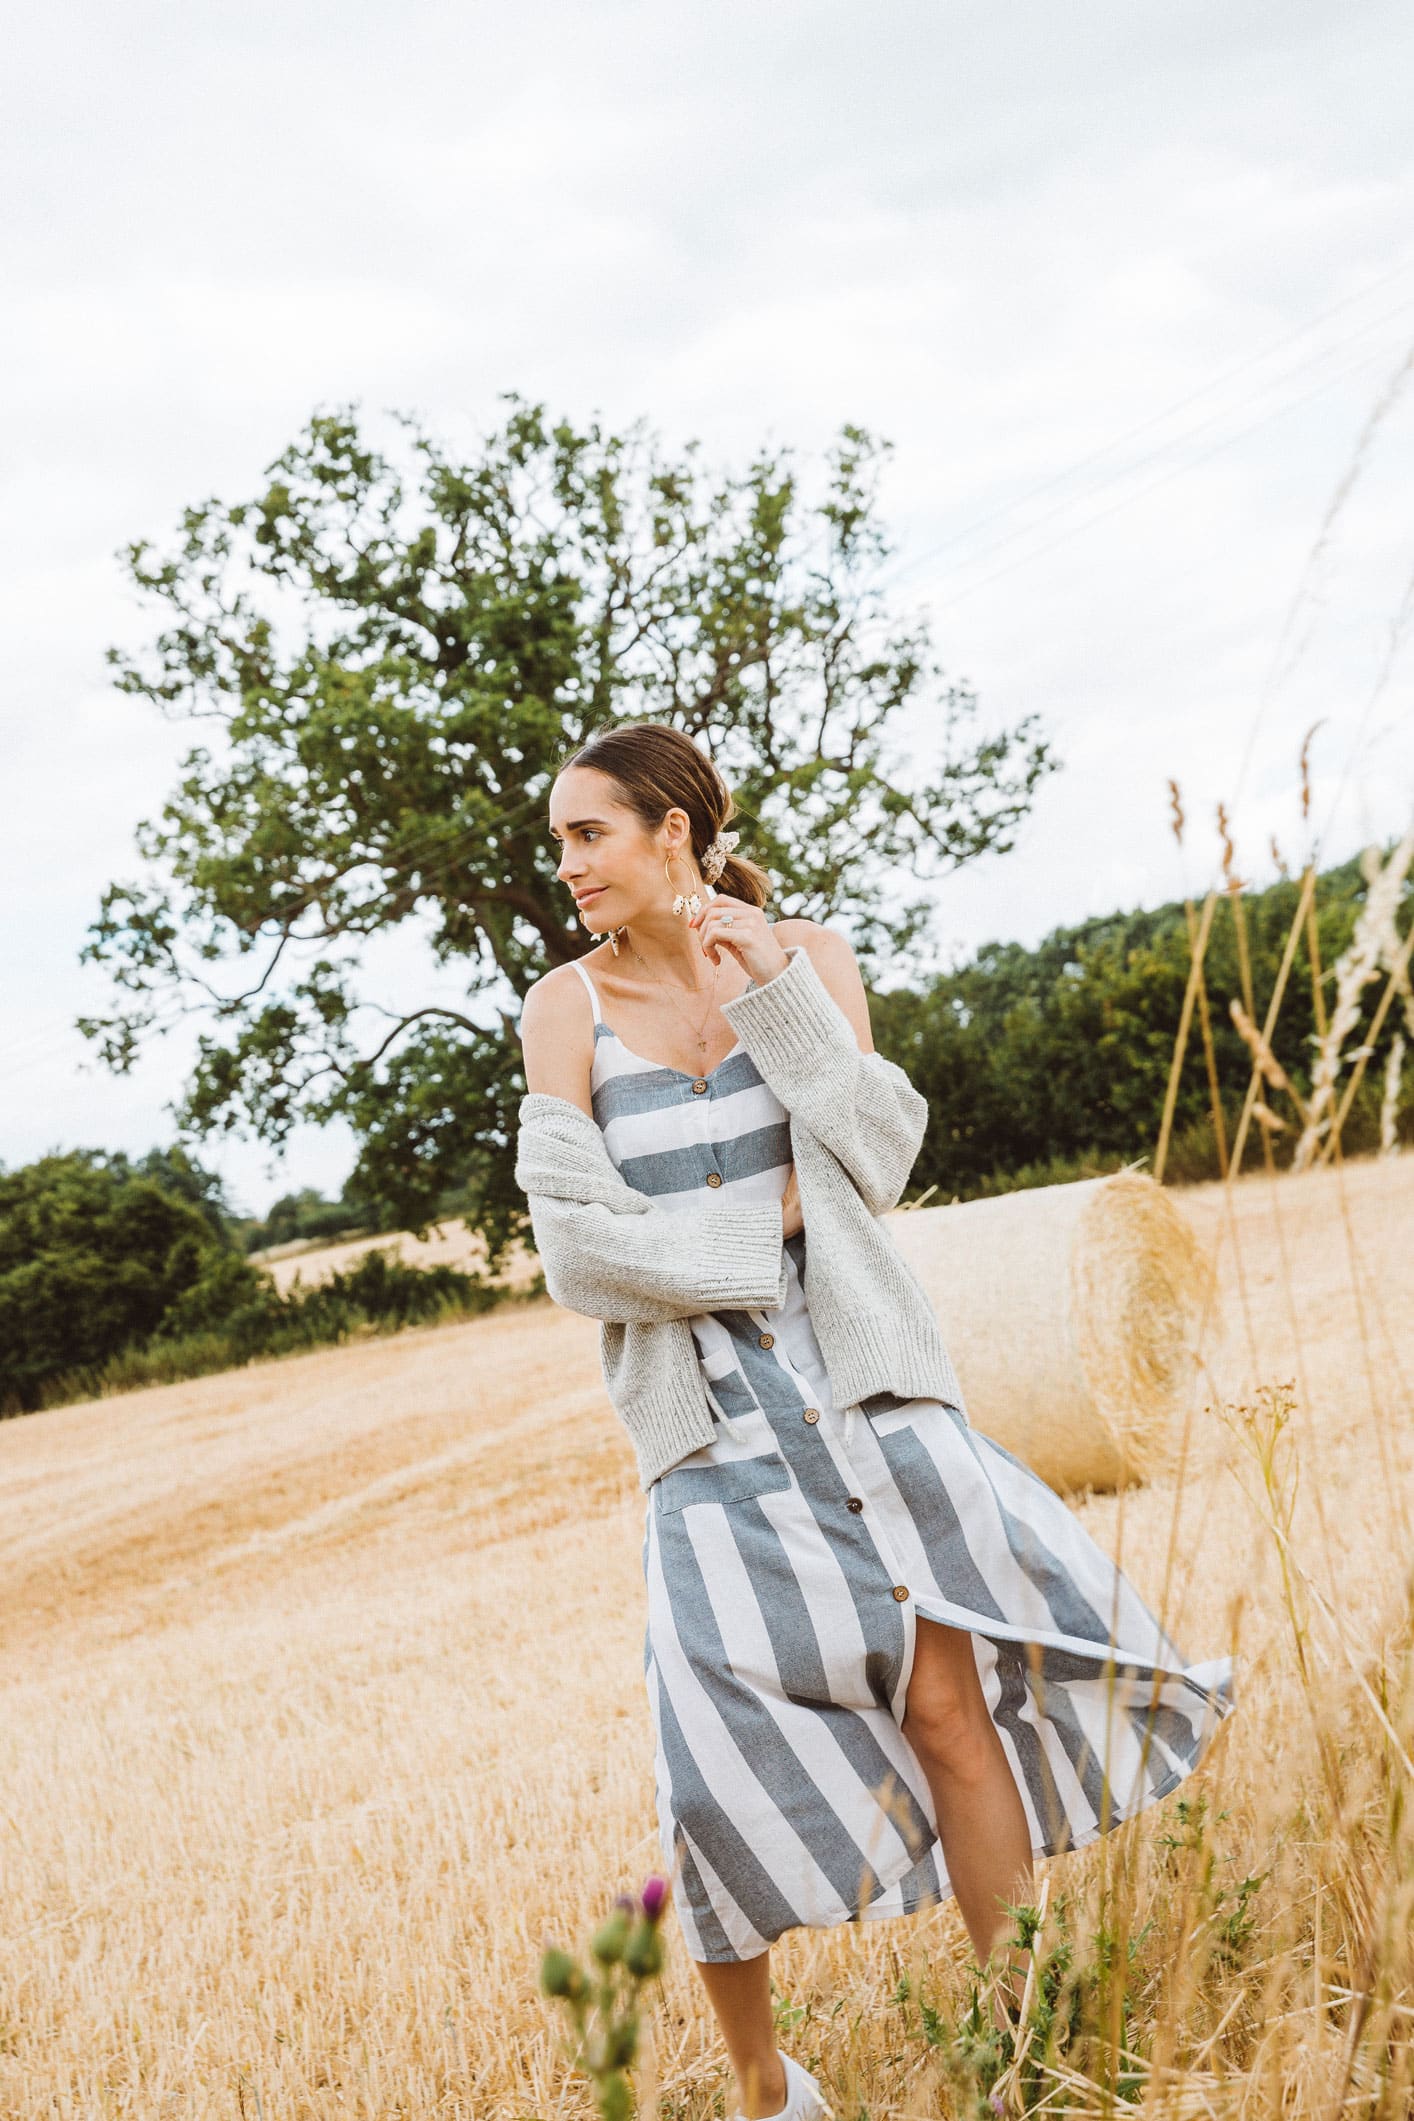 Louise Roe Wearing Summer Trends With Linen Dress Seashell Earrings and Scrunchies